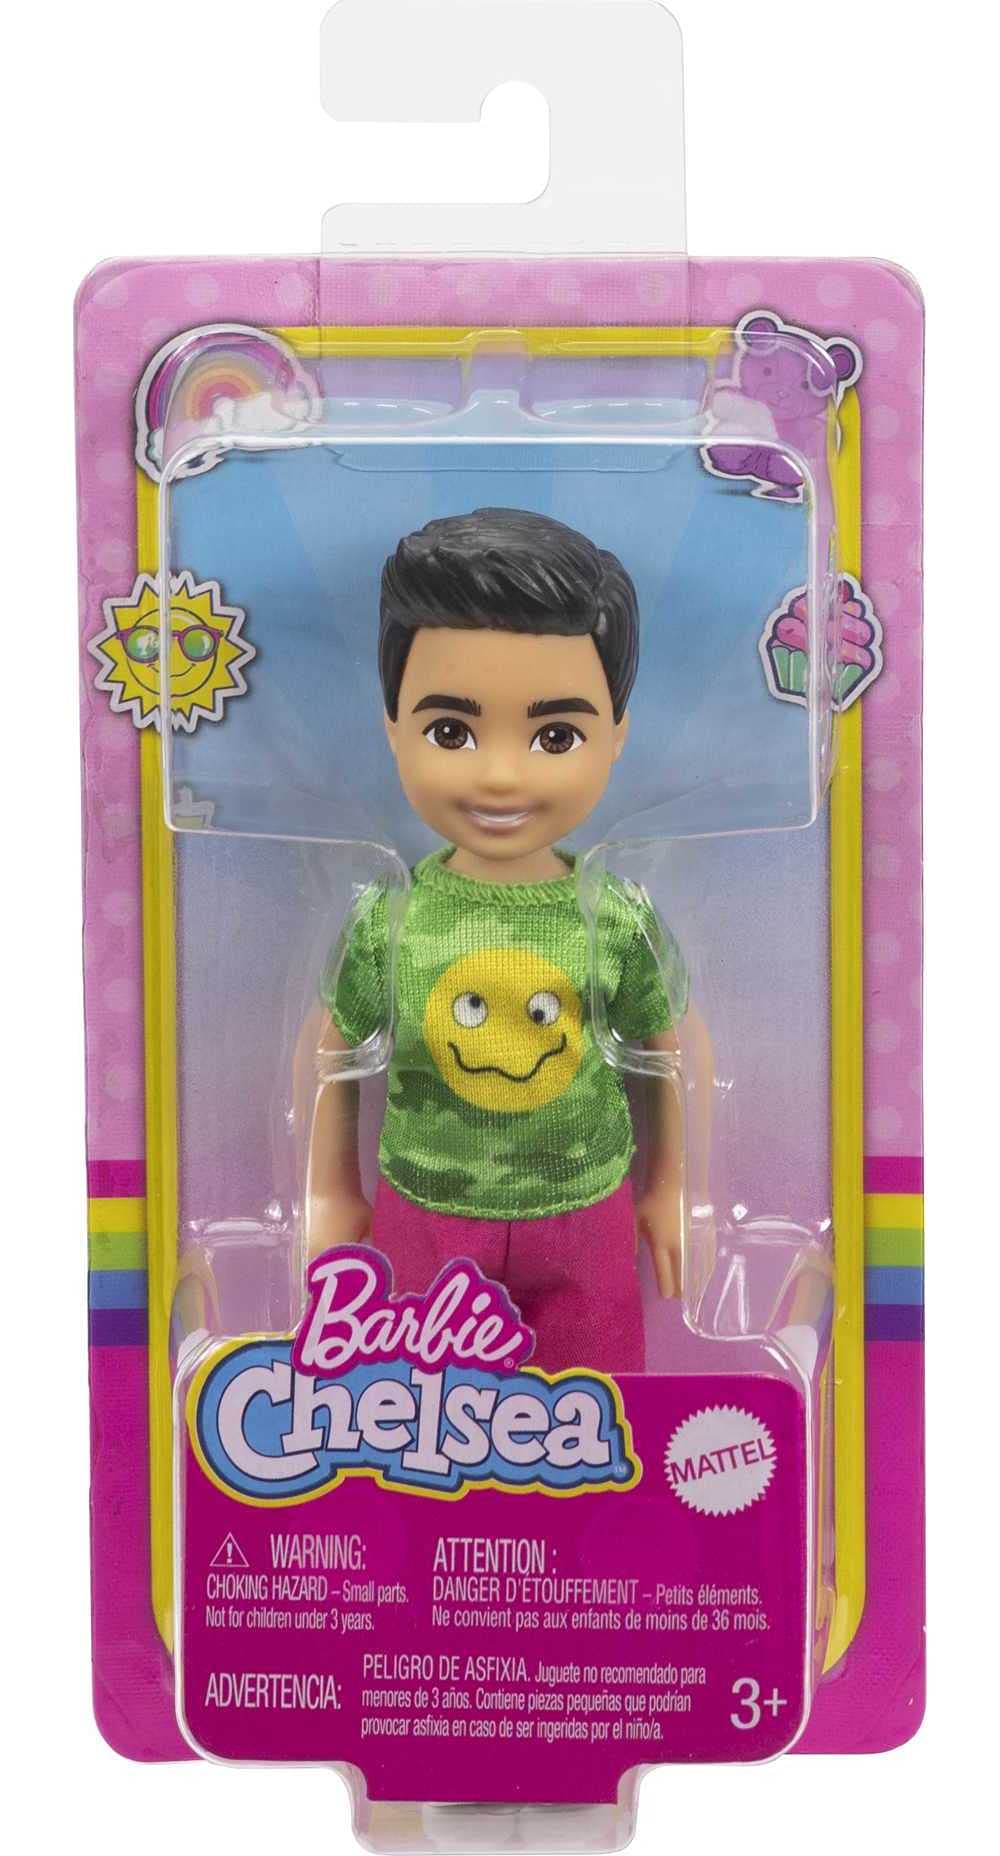 Barbie Chelsea Boy Doll – Square Imports